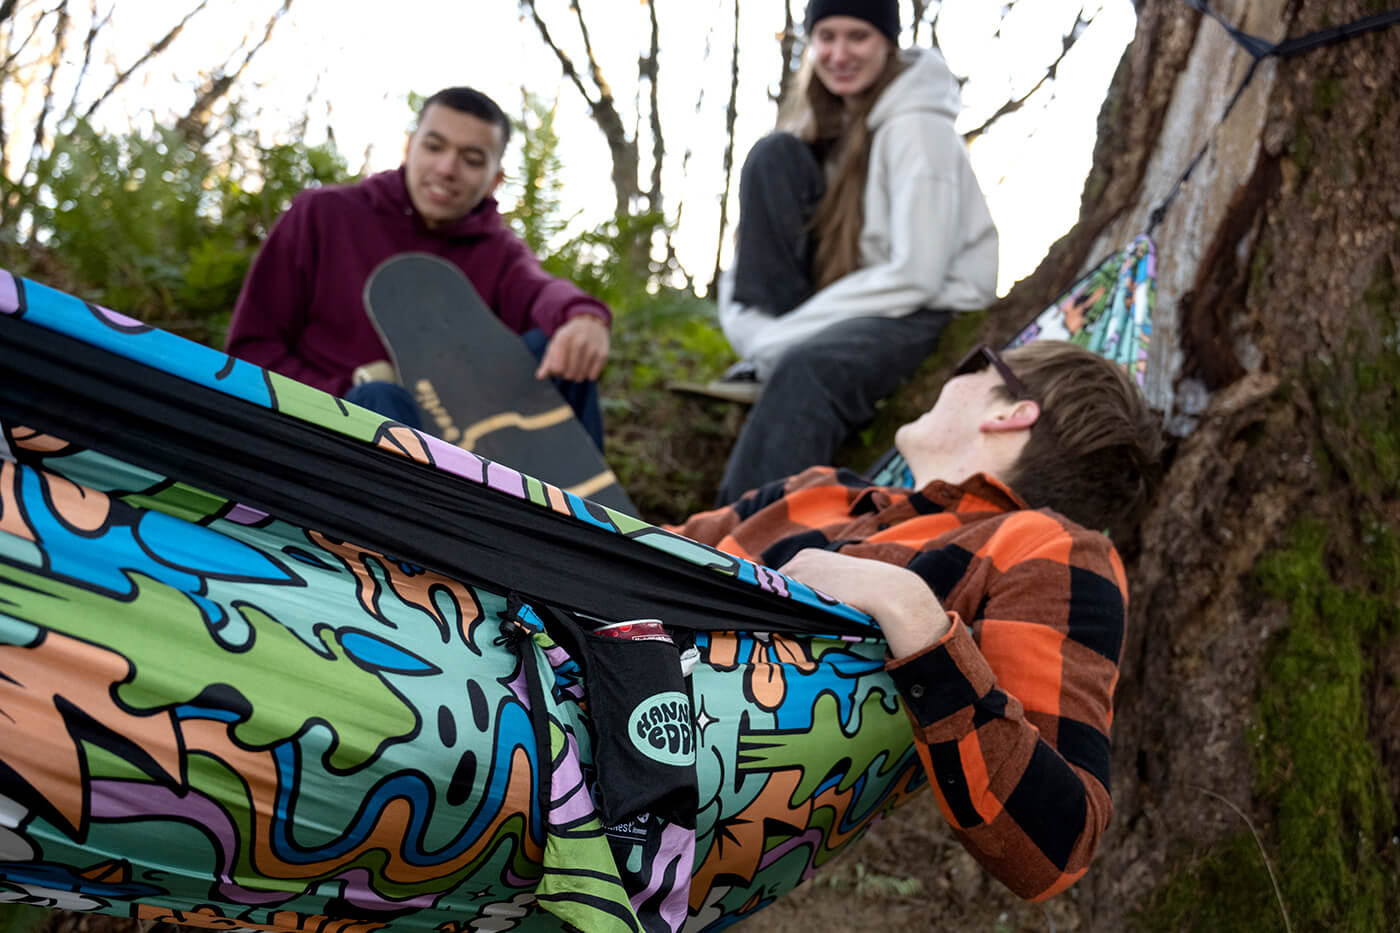 A group of friends talk and hangout in the Hannah Eddy Nature Talk DoubleNest Print Hammock